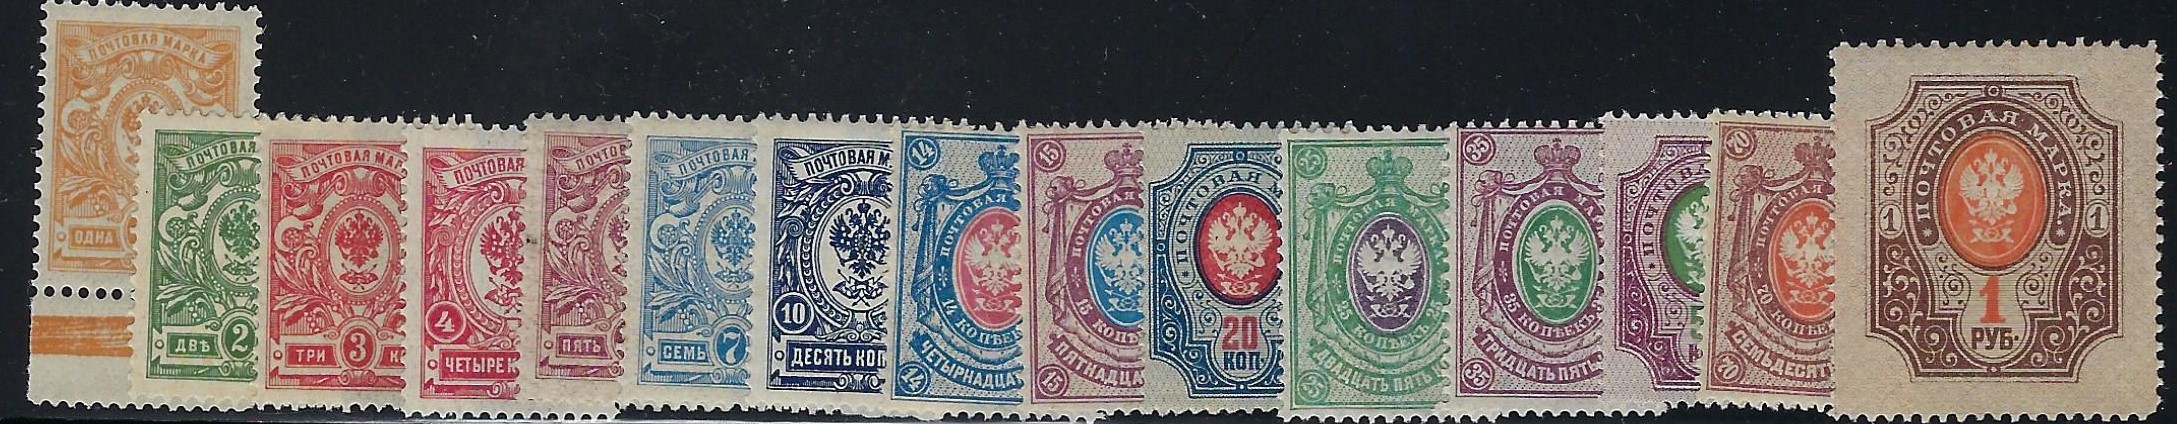 Russia Specialized - Imperial Russia 1909-15 issues (unwatermarked) Scott 73a-87a 